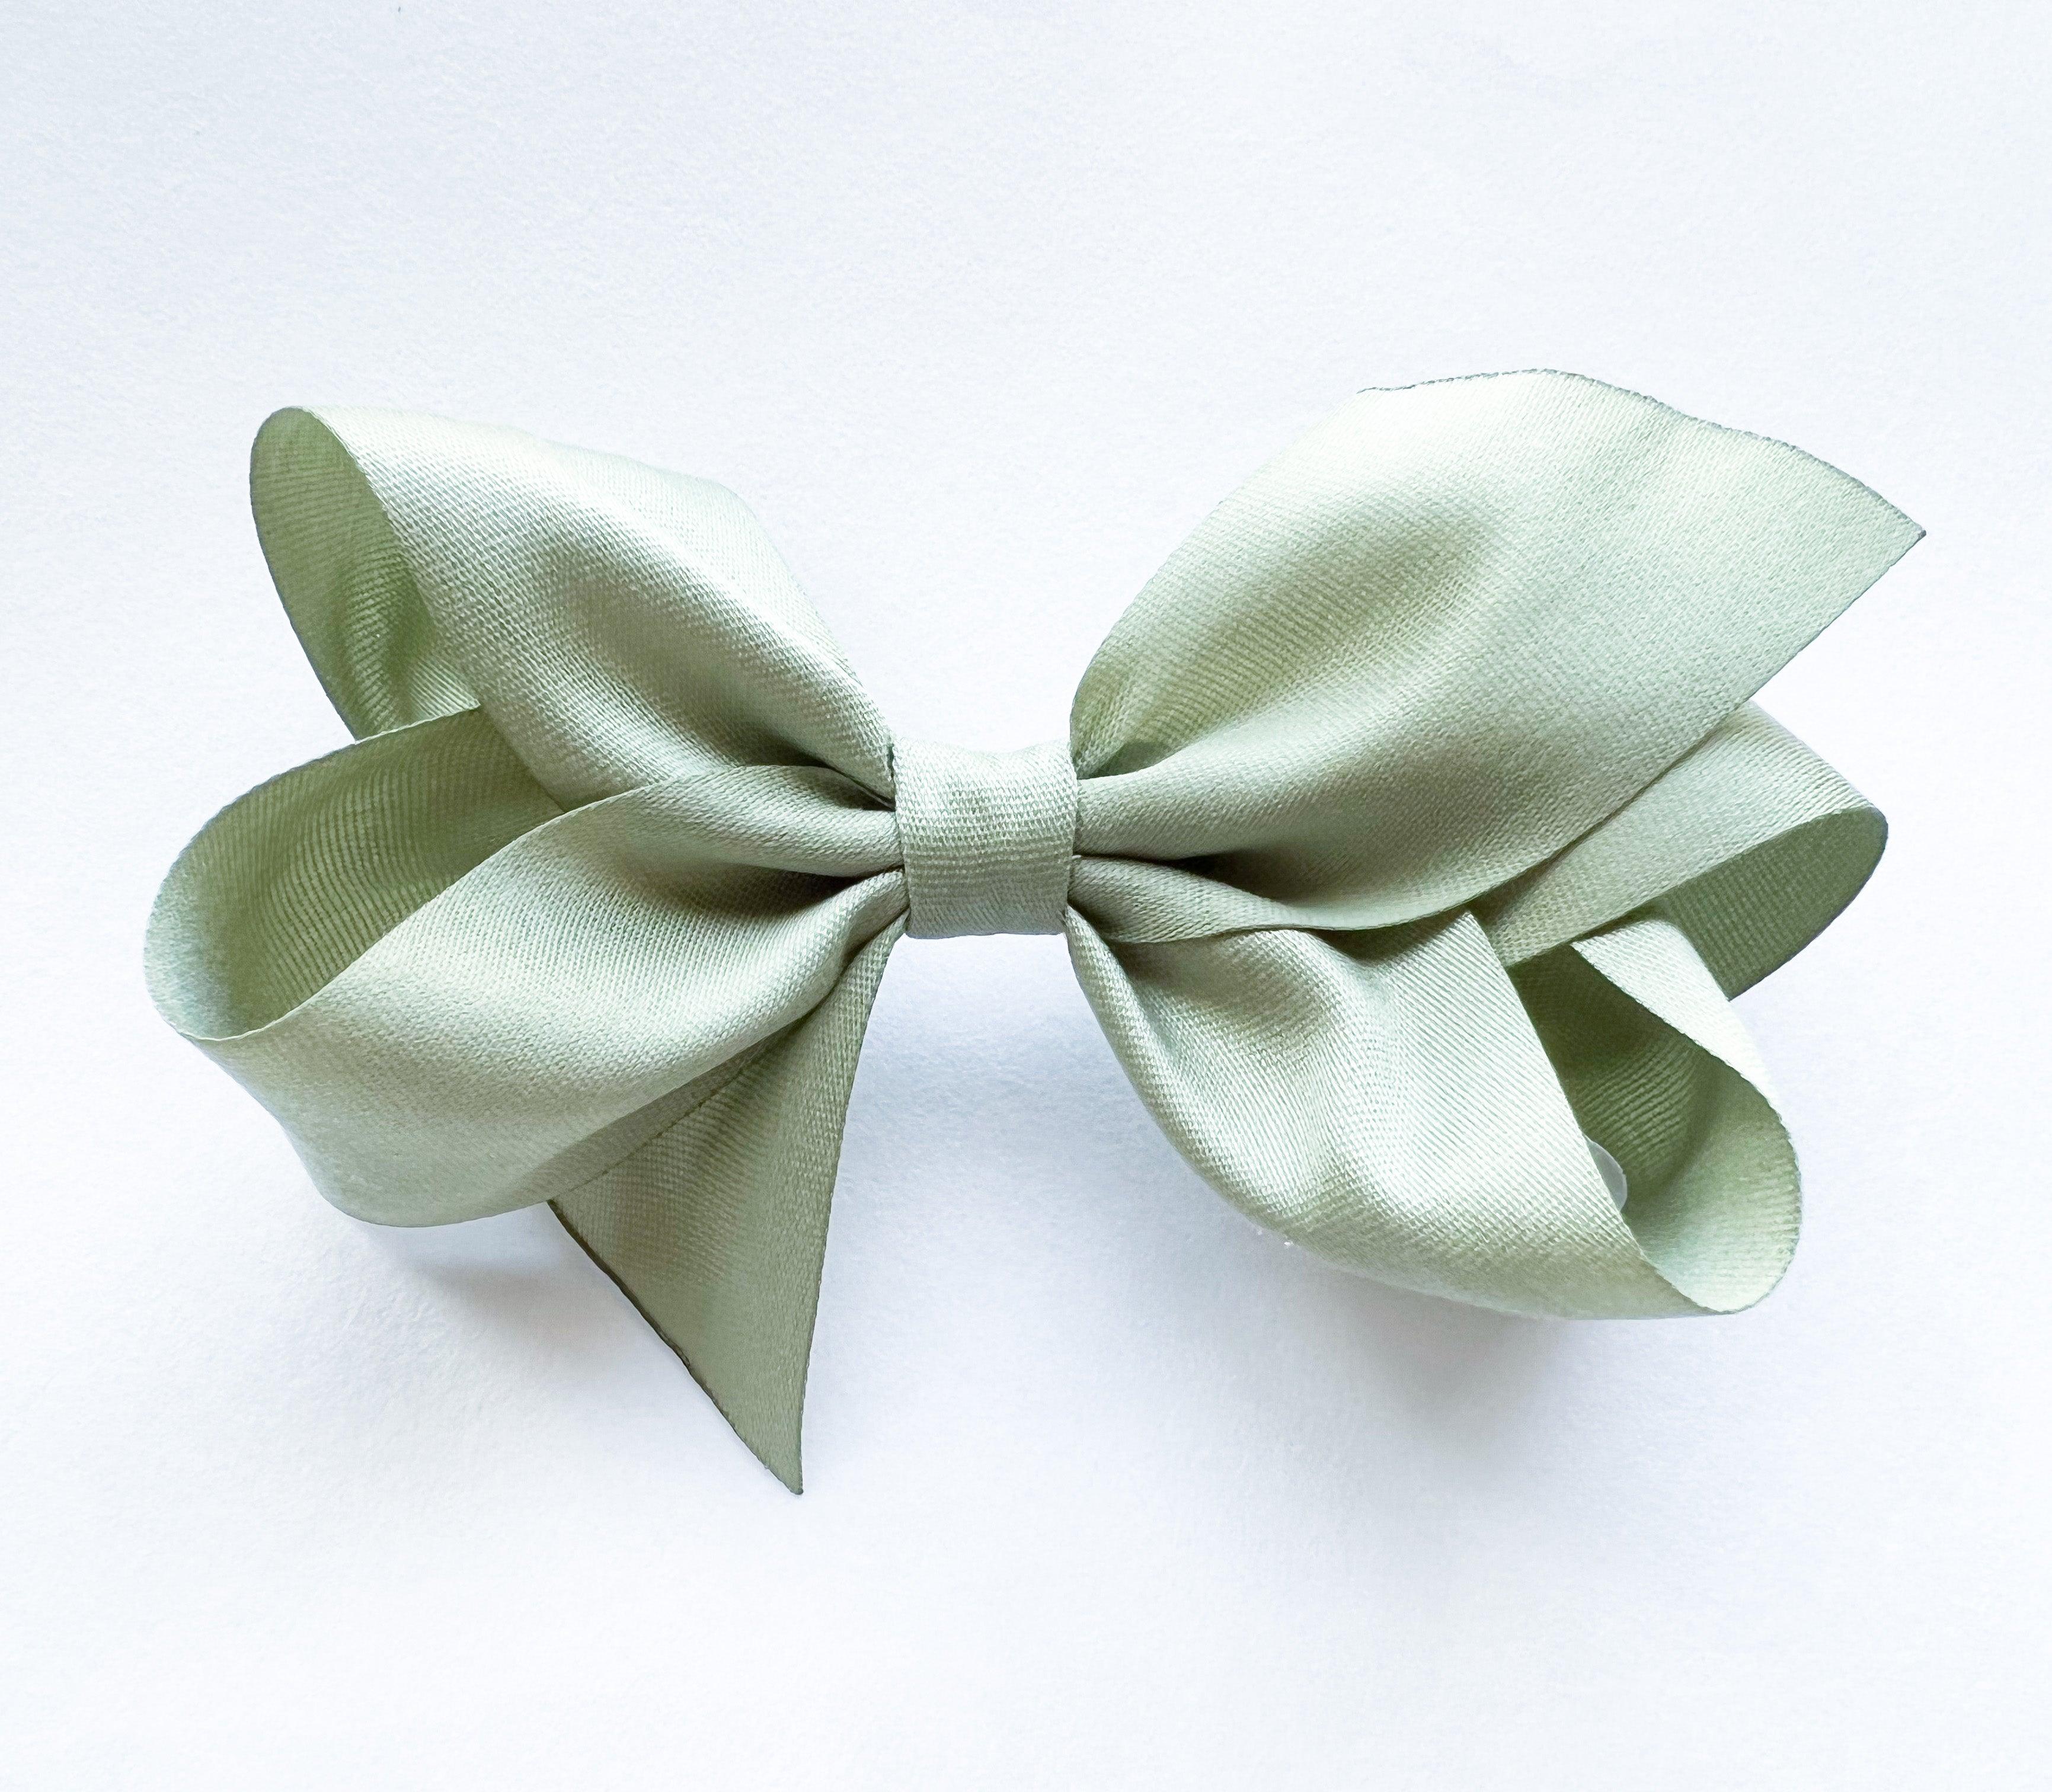 Sissy Bow - Sage | Nashville Bow Co. - Classic Hair Bows, Bow Ties, Basket Bows, Pacifier Clips, Wreath Sashes, Swaddle Bows. Classic Southern Charm.